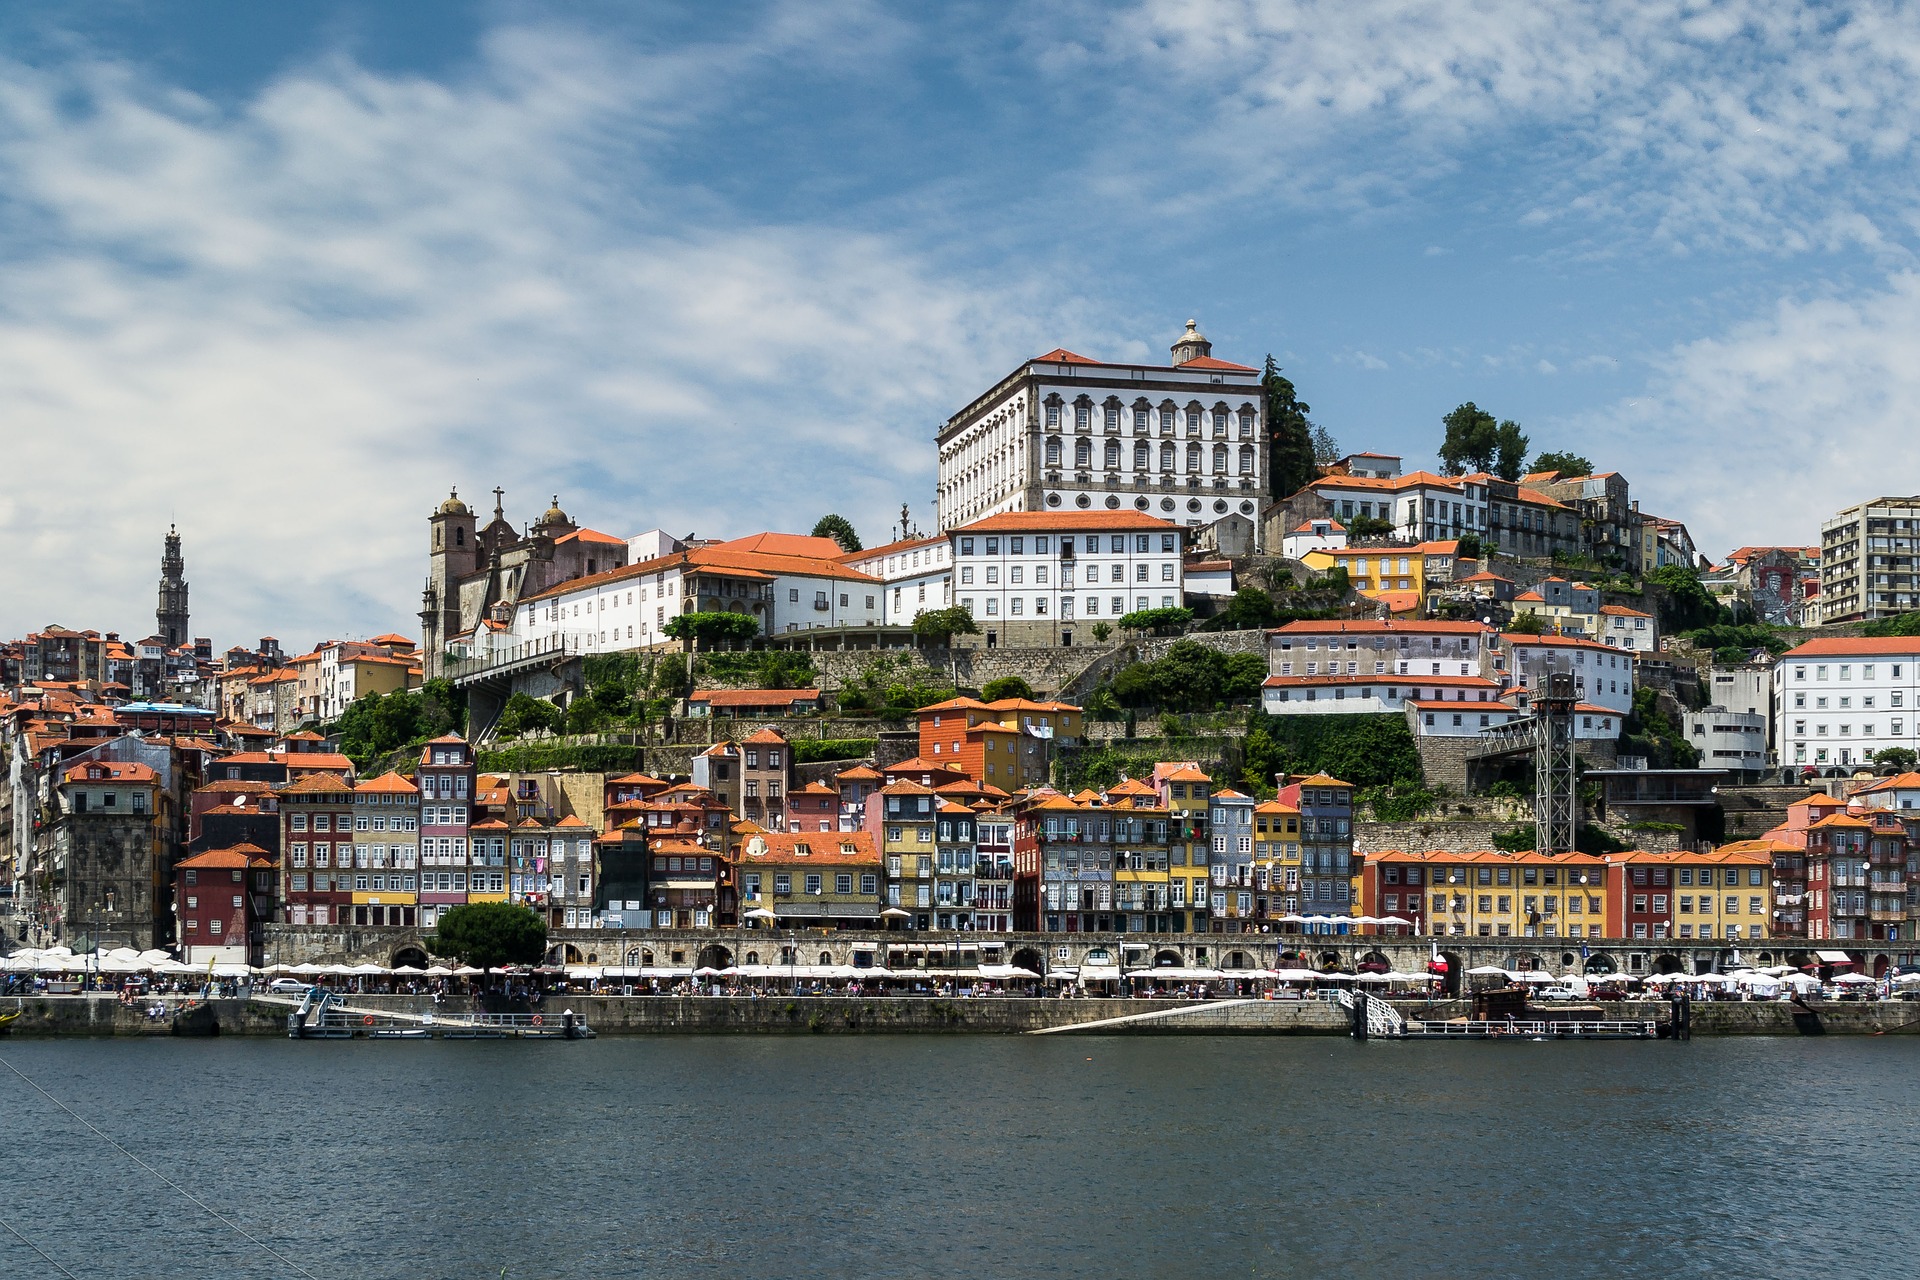 Six Off-the-beaten-path things to do in Porto, Portugal